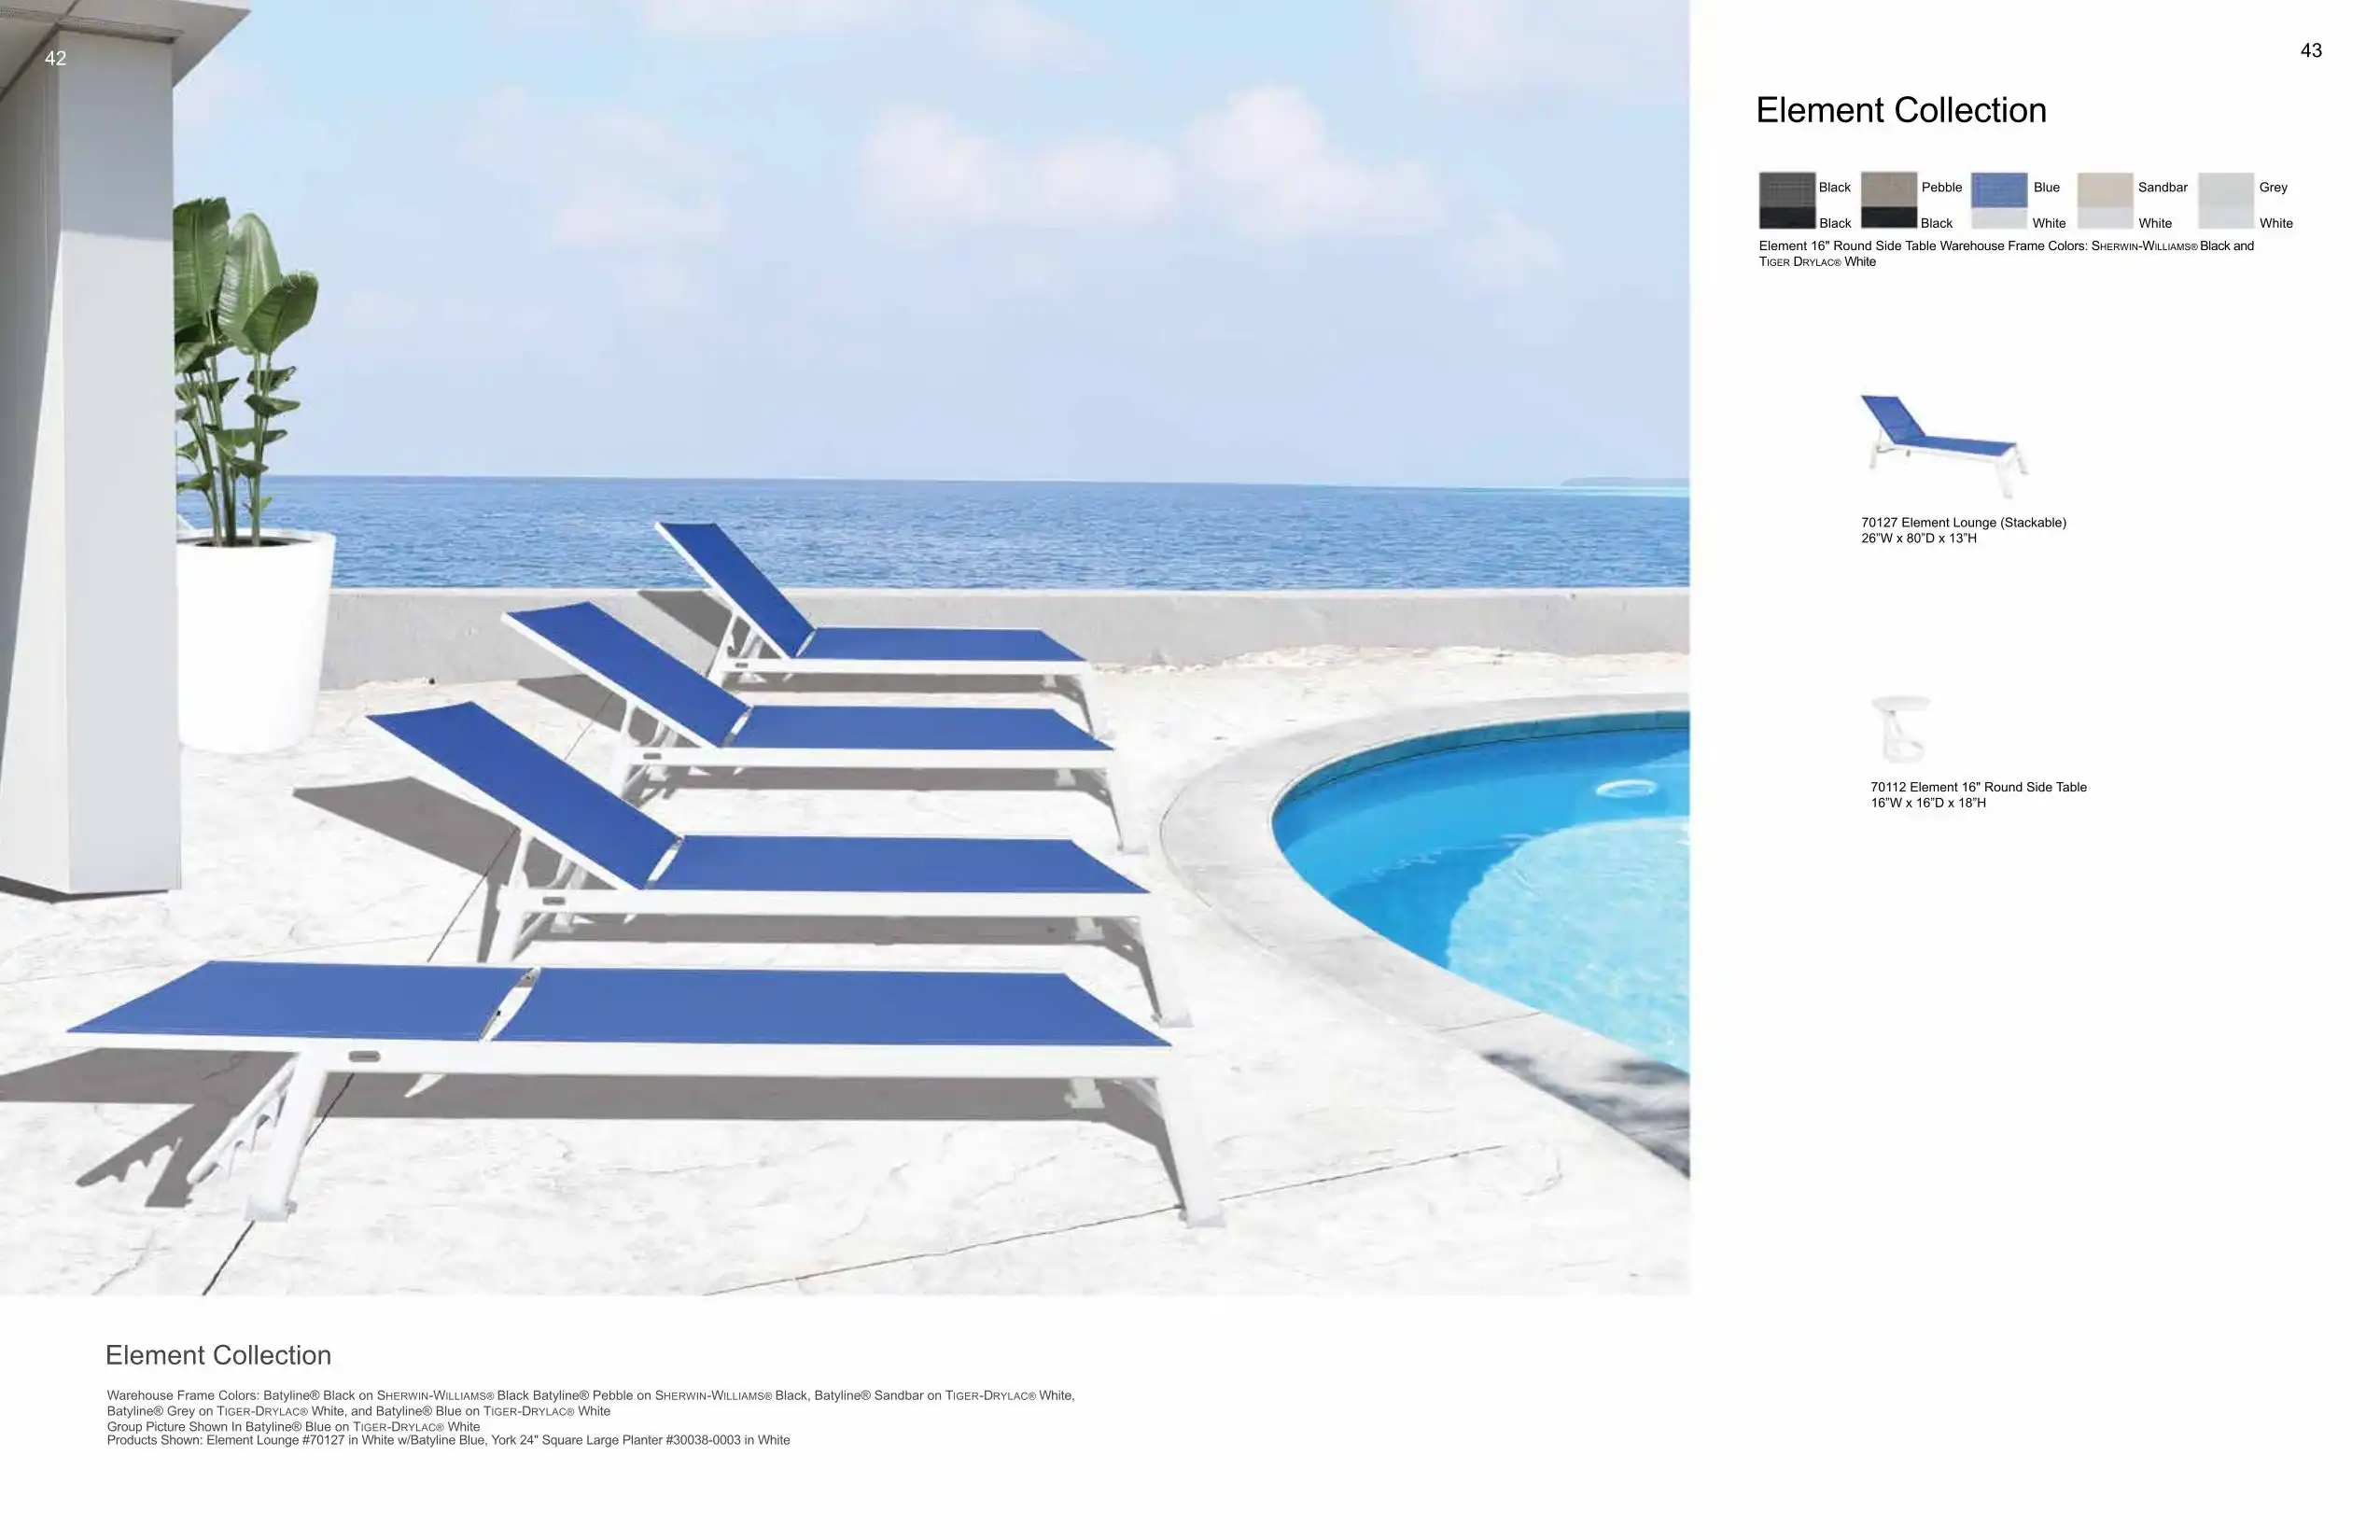 ELEMENT Chaise Lounge (SLING) Collection(s) by Cabana Coast 